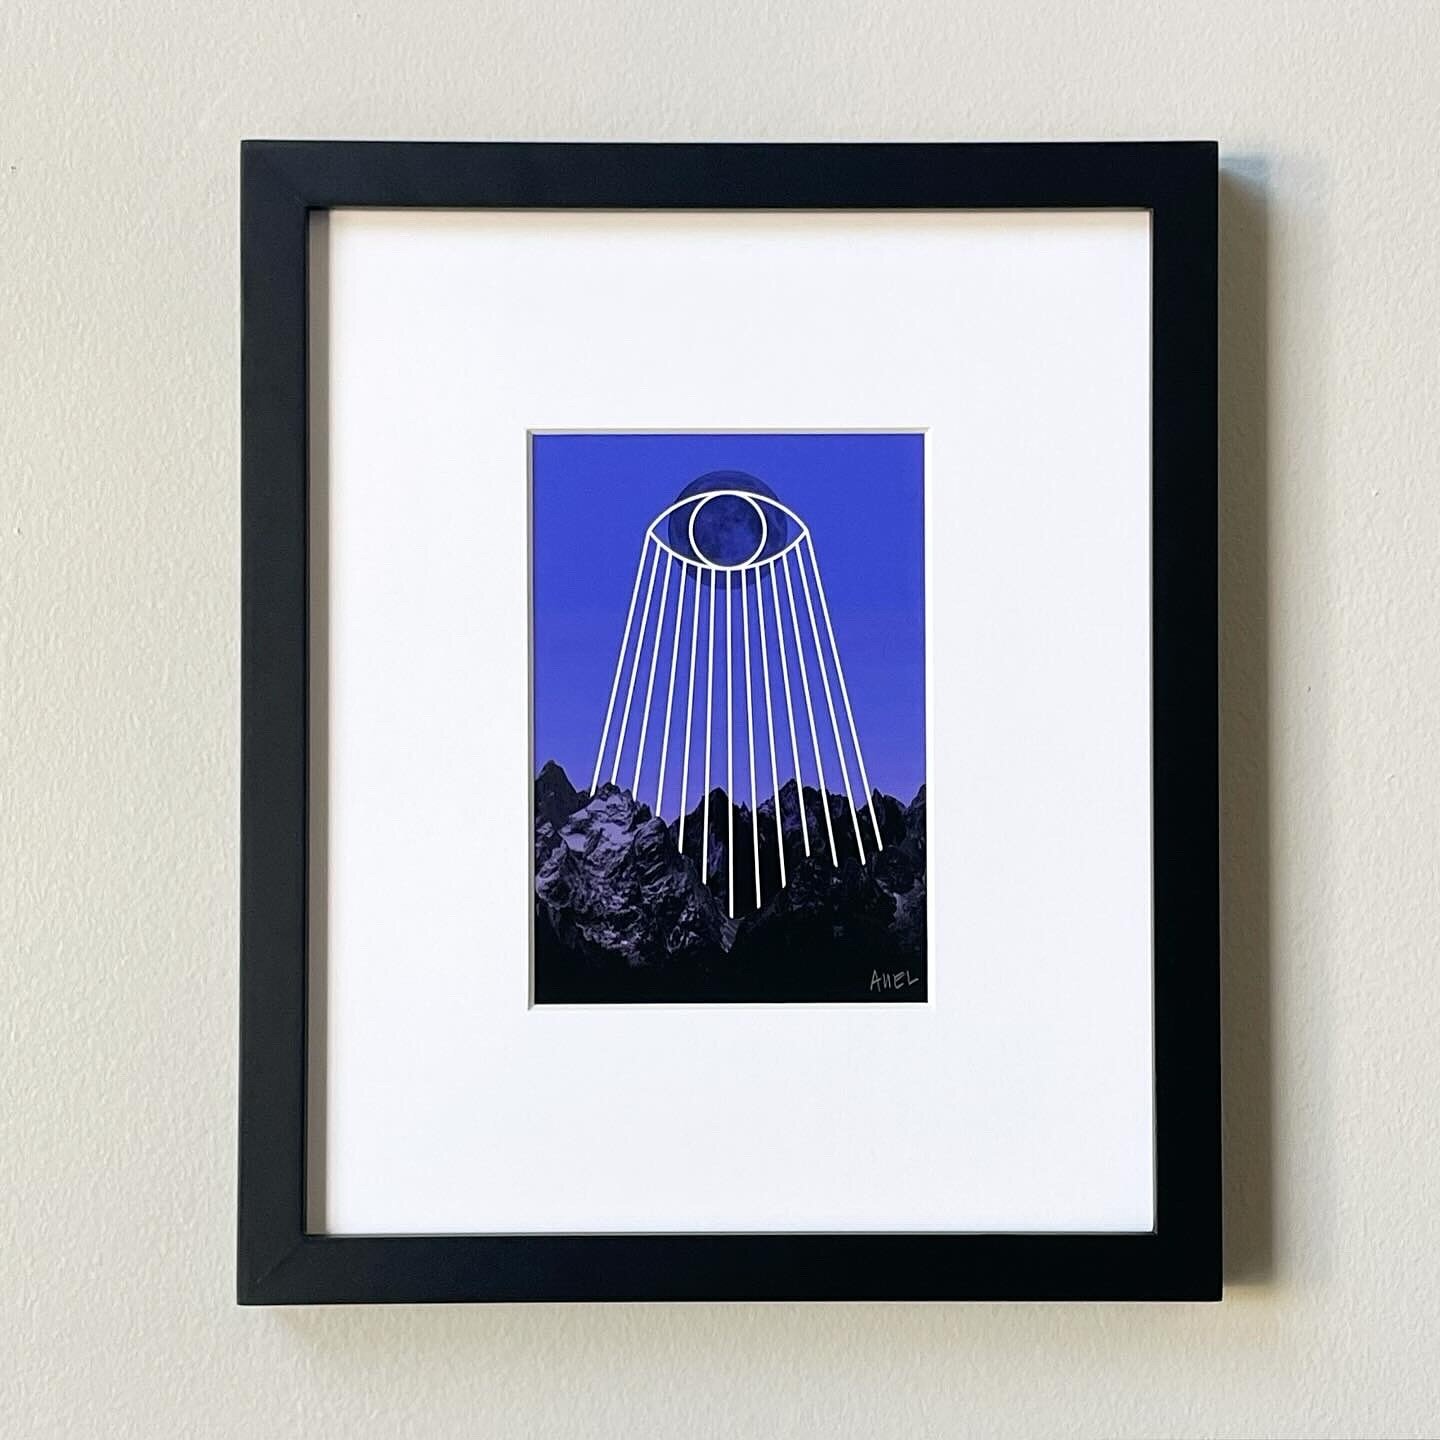 All seeing//blue moon in this size/colorway/frame option is currently available 25% off through @gamutgallerympls online or in person through 1/6. Flash sale, do it to it. 

No jokes on the SUPER easy street parking directly out front: 717 s 10th st 